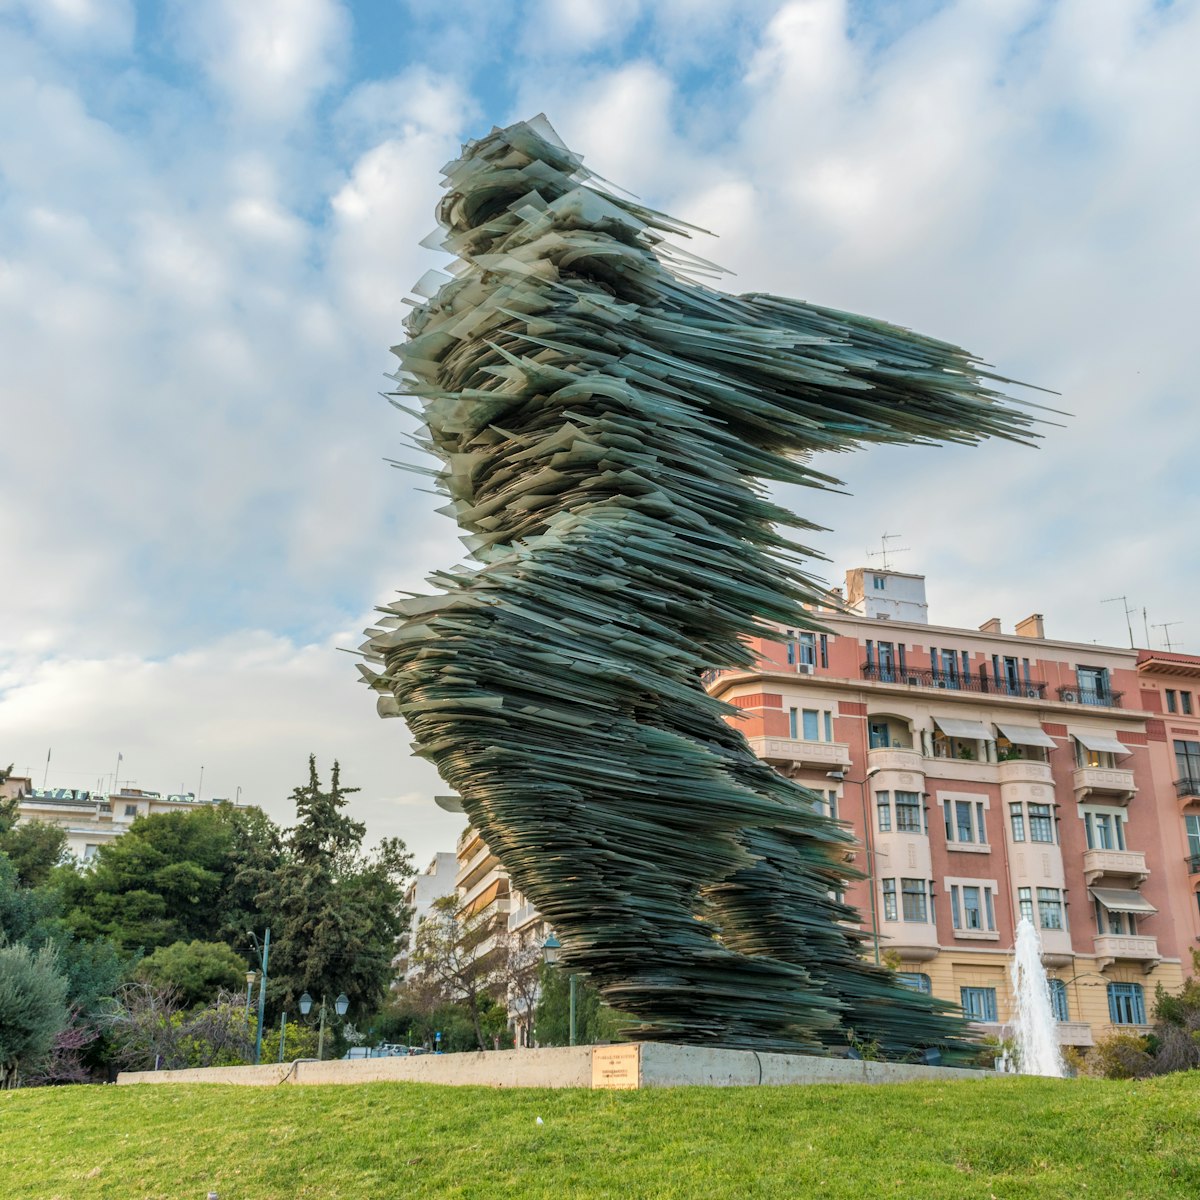 Athens, Greece - 12 March 2018: Dromeas, also known as the "The Runner", a monumental sculpture of glass stacked on iron by Costas Varotsos.; Shutterstock ID 1179520771; your: Erin Lenczycki; gl: 65050; netsuite: Digital; full: POI
1179520771